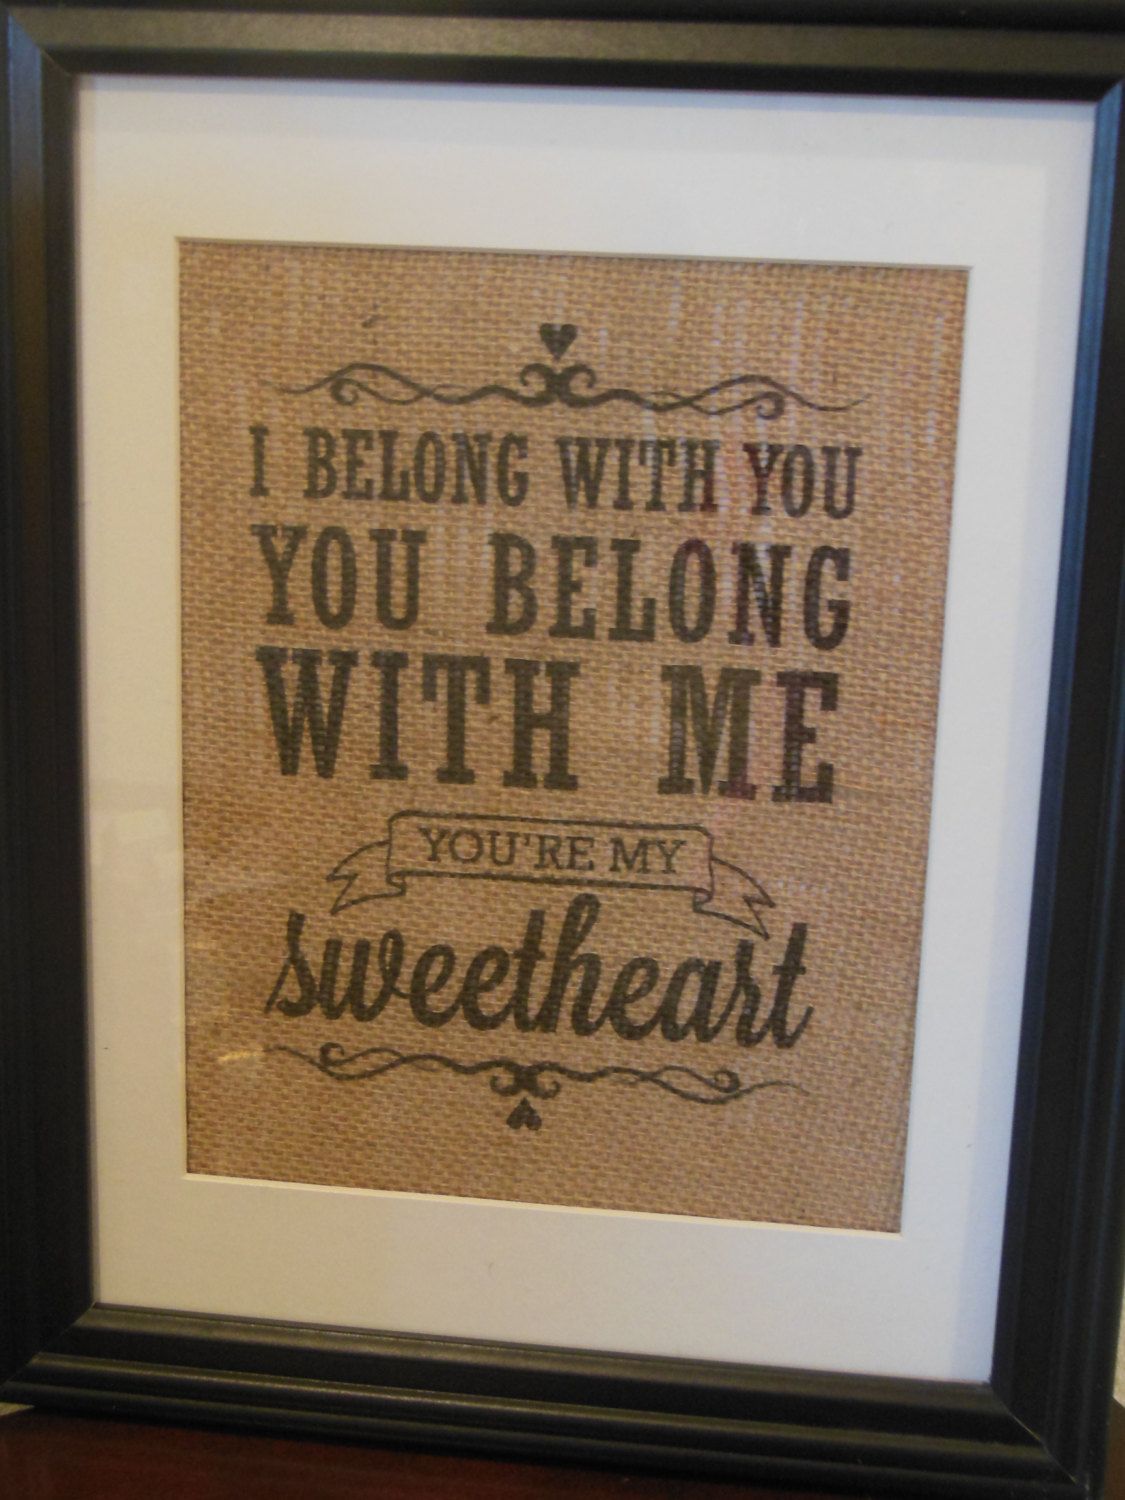 Valentines+Day+Gift+for+him+or+her++I+belong+by+BurlapByEverAfter,+$25.00